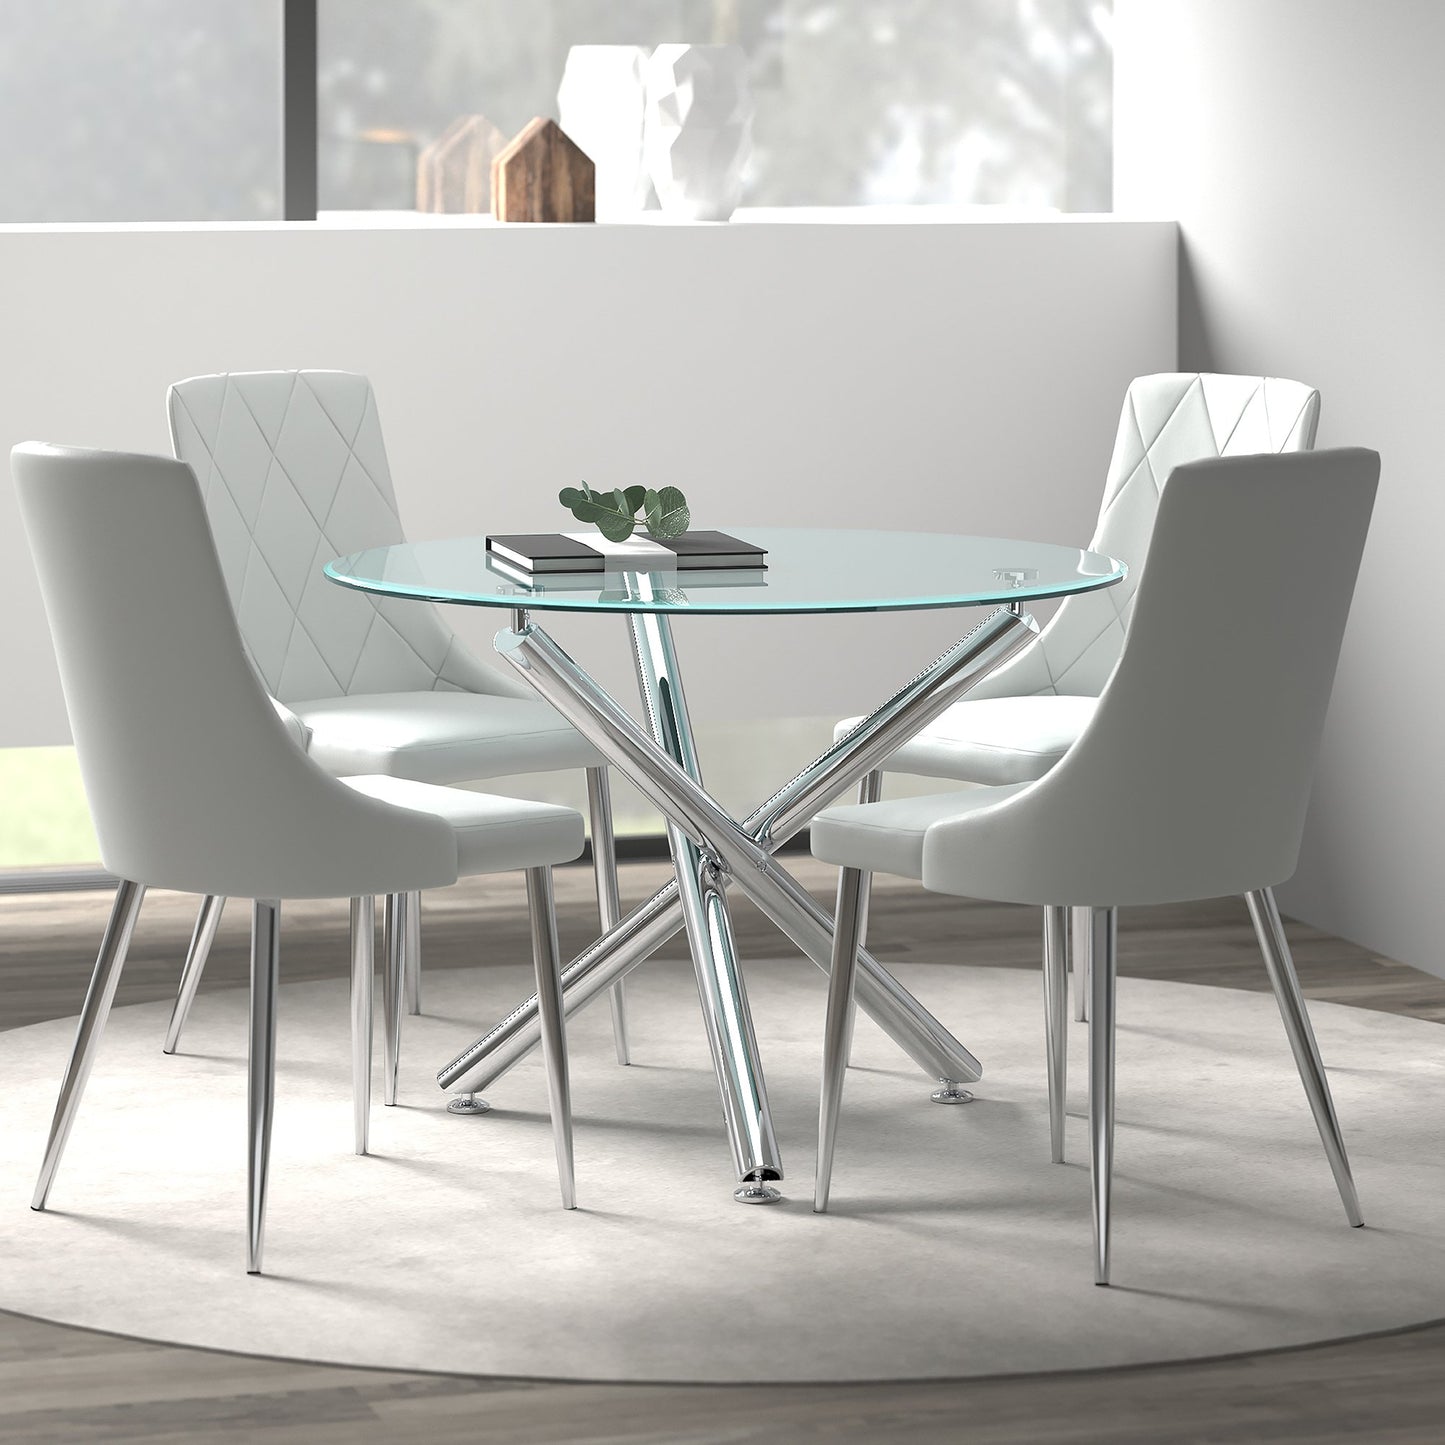 (SOLARA - DEVO GREY- 5) - 39" ROUND - DINING TABLE - WITH 4 CHAIRS